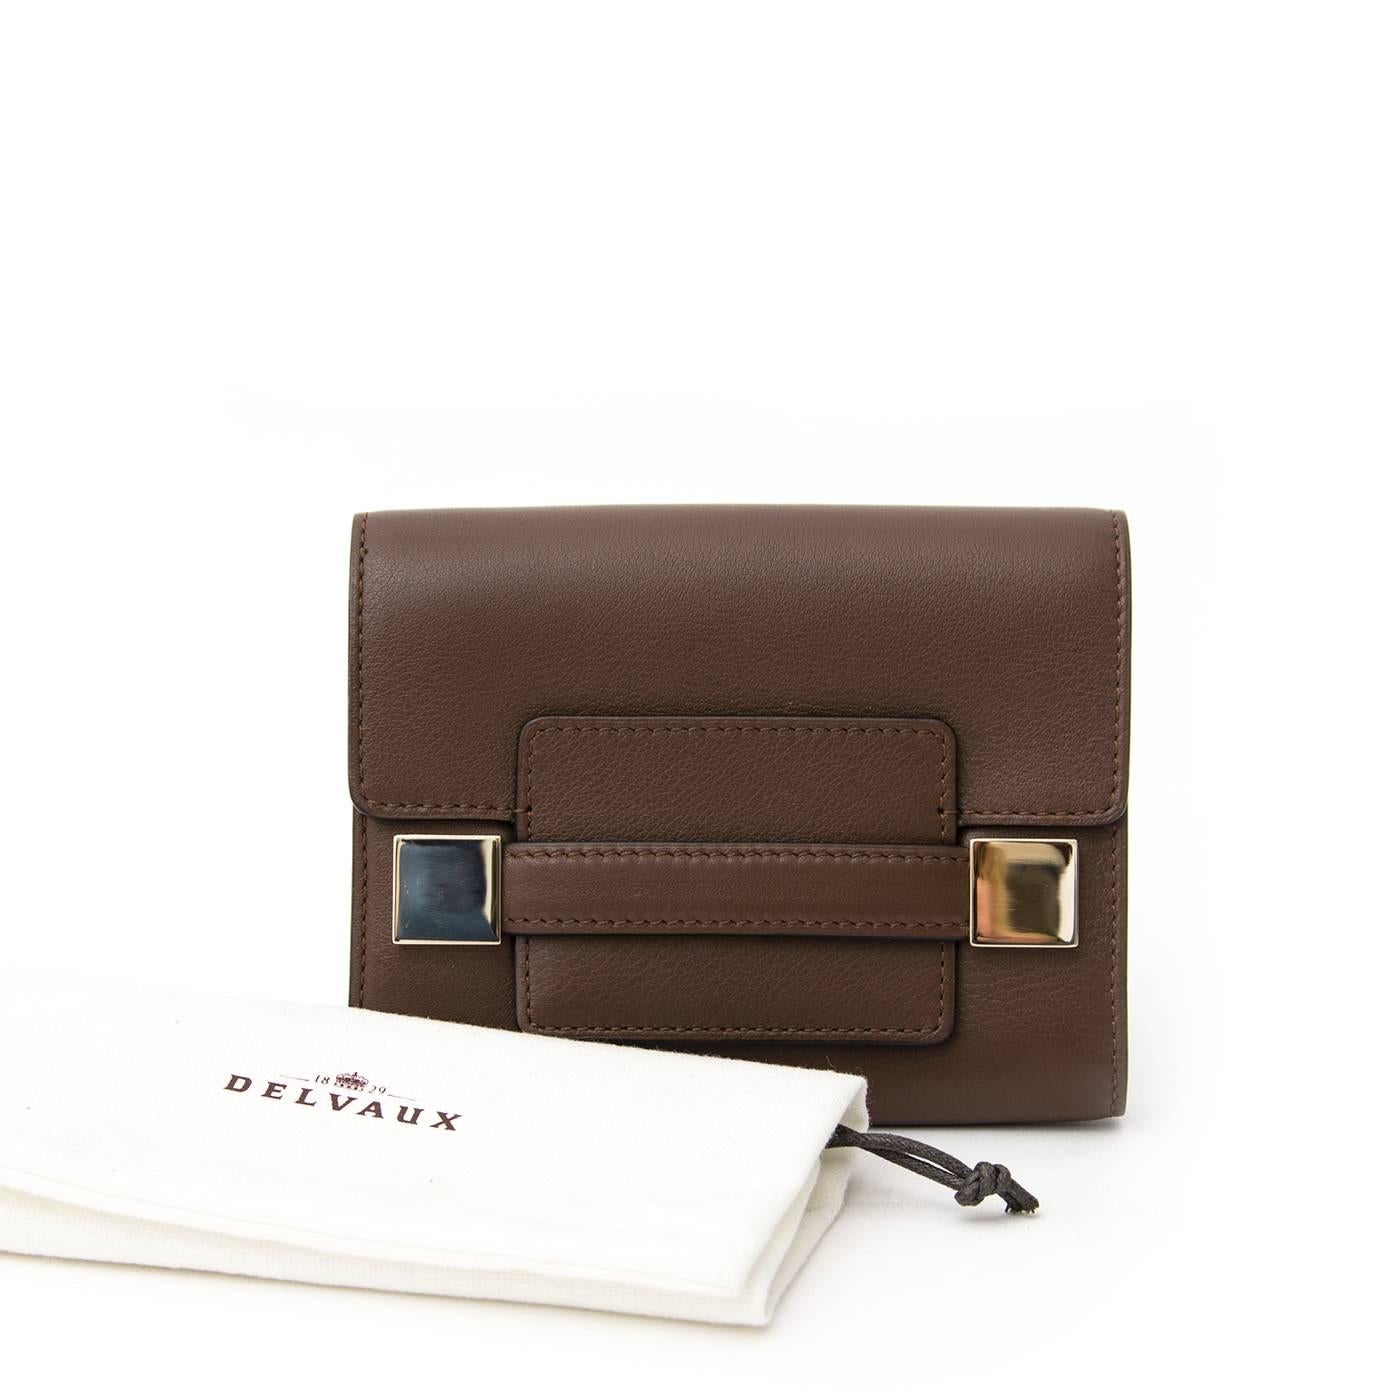 This Delvaux wallet is made out of supple and soft brown leather. The interior is lined with brown and beige leather and beige colored canvas fabric. It offers three large compartments and six smaller compartments for creditcards. The middle